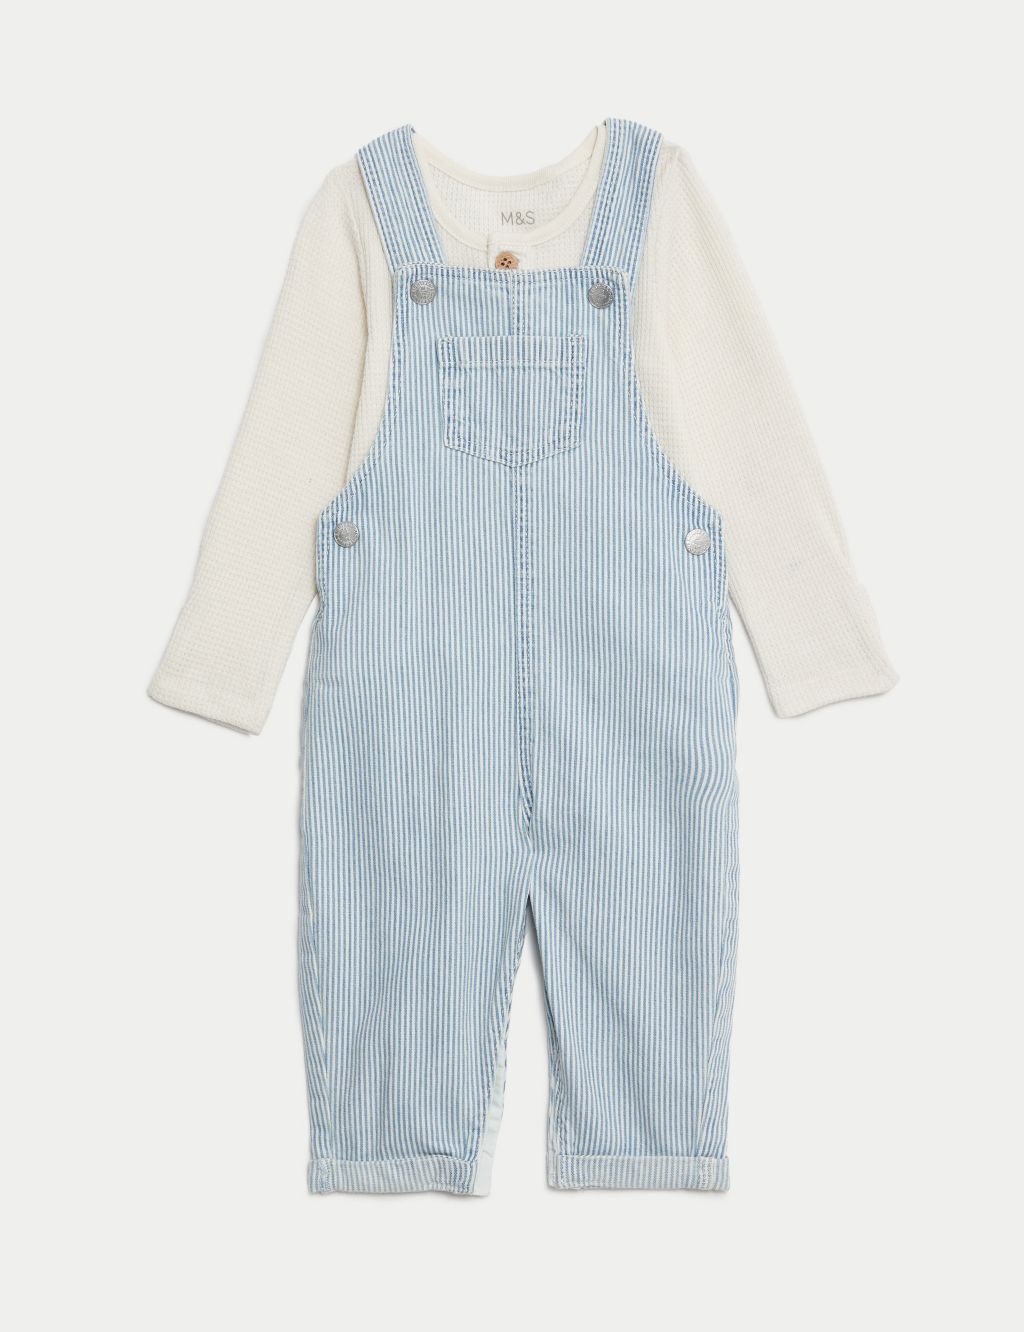 2pc Cotton Rich Striped Dungaree Outfit (0-3 Yrs) image 1